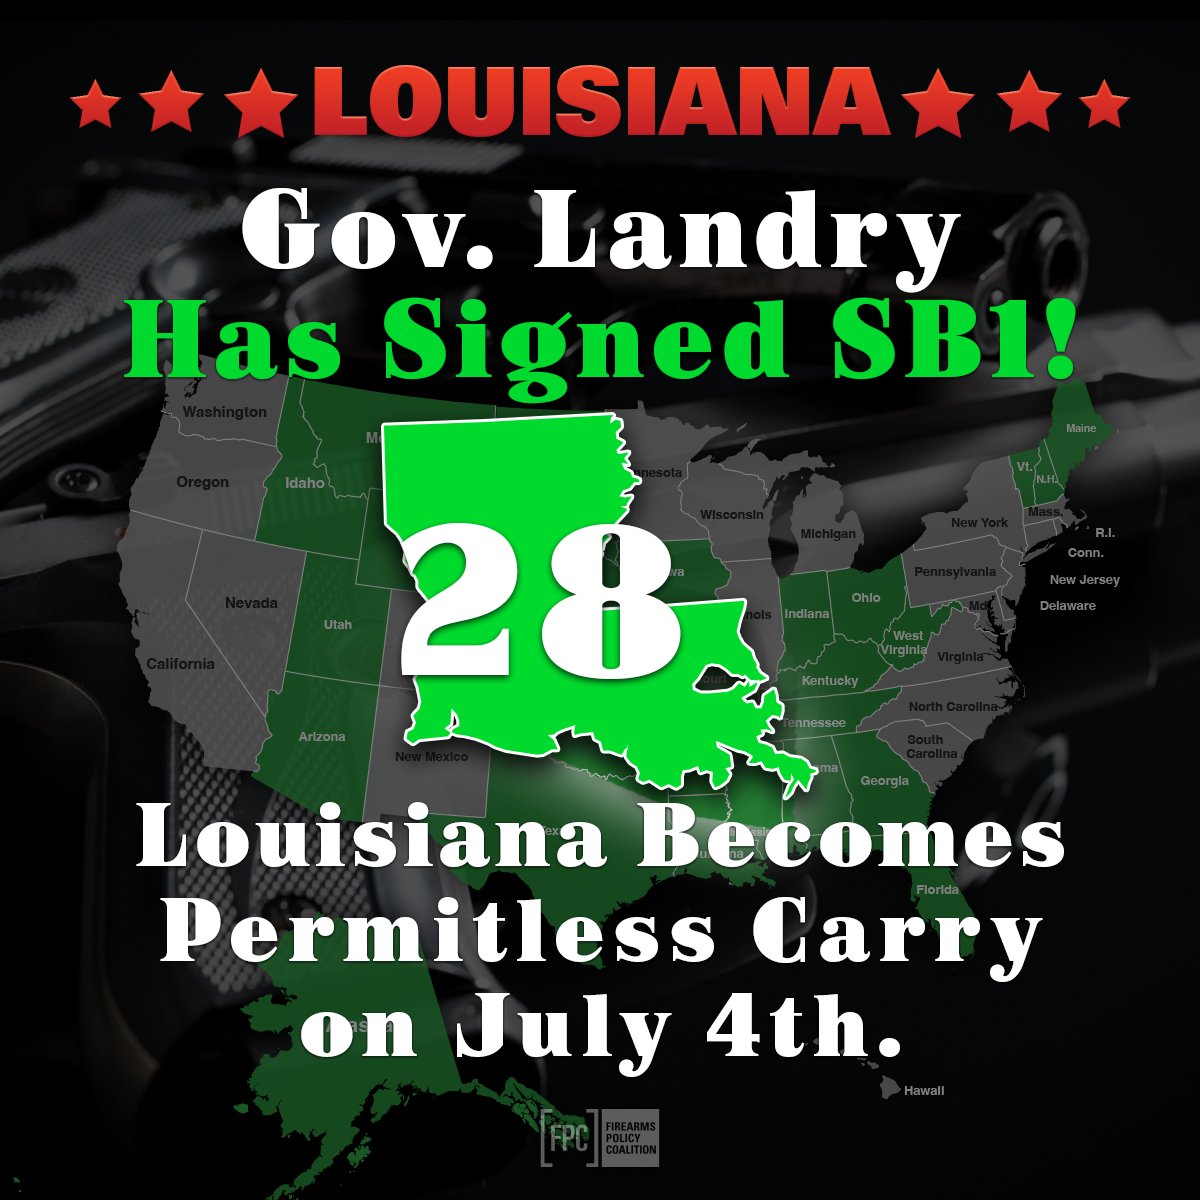 BOOM! Gov. Landry has signed the Permitless Carry Bill, SB1! Louisiana is now NUMBER 28!